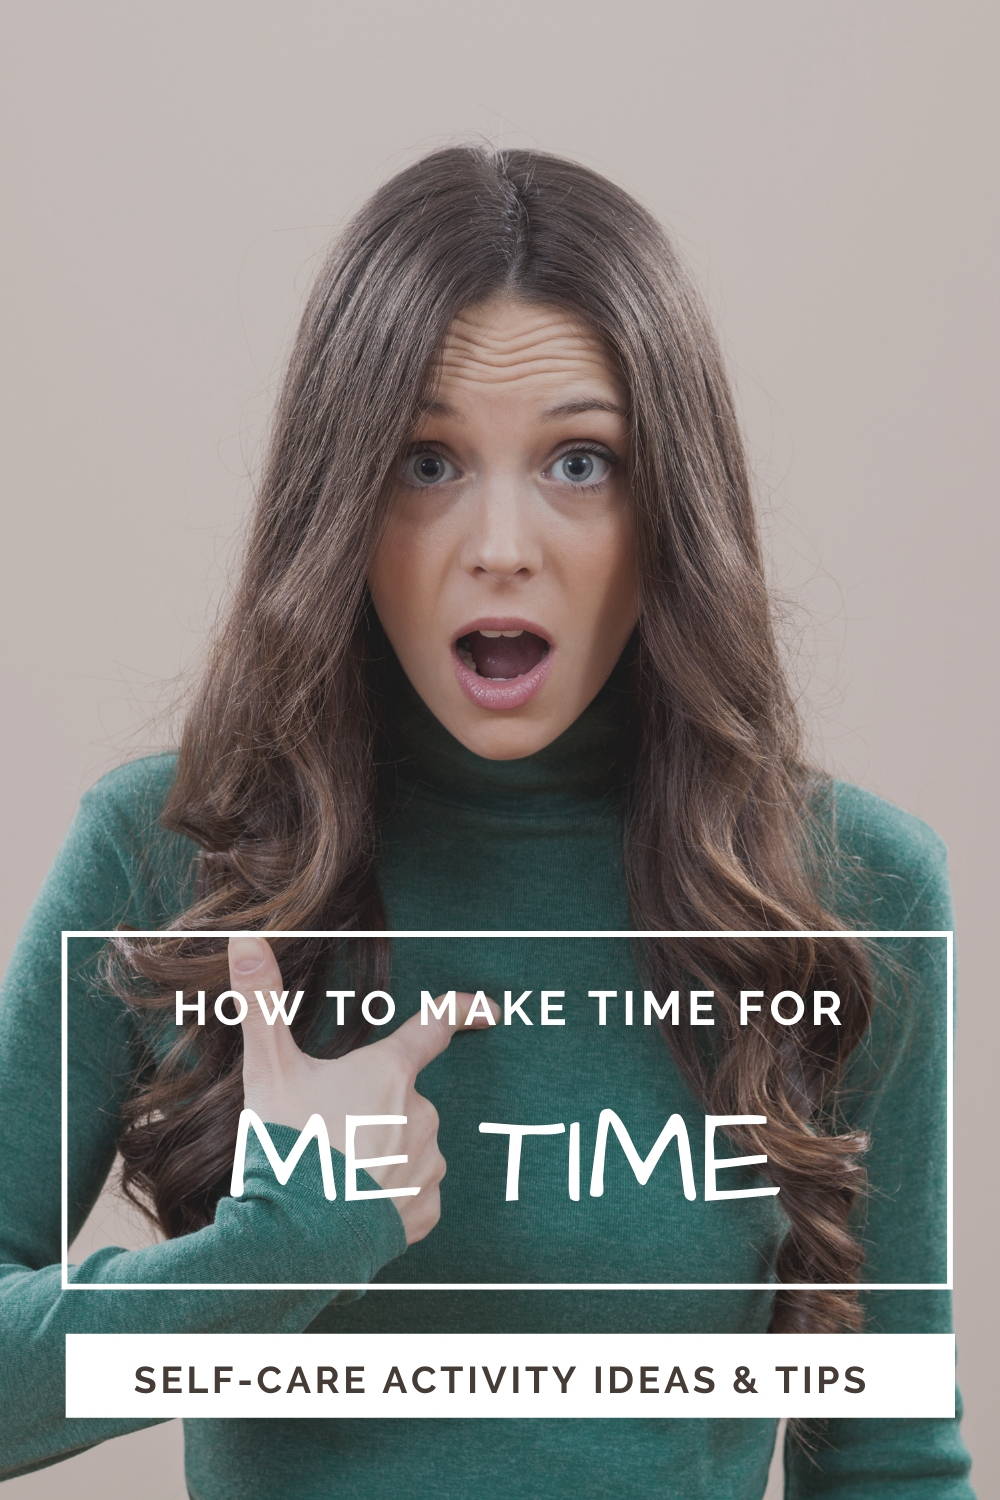 How to make time for ME time. This is a problem most of us experience in our busy lives but it is important to understand the health benefits of making time for yourself to relax | Monsuri - It's about ME Time. #selfcaretips #metimeactivities #dailyroutine #selfcarematters #maketimeforyou #takeastepback